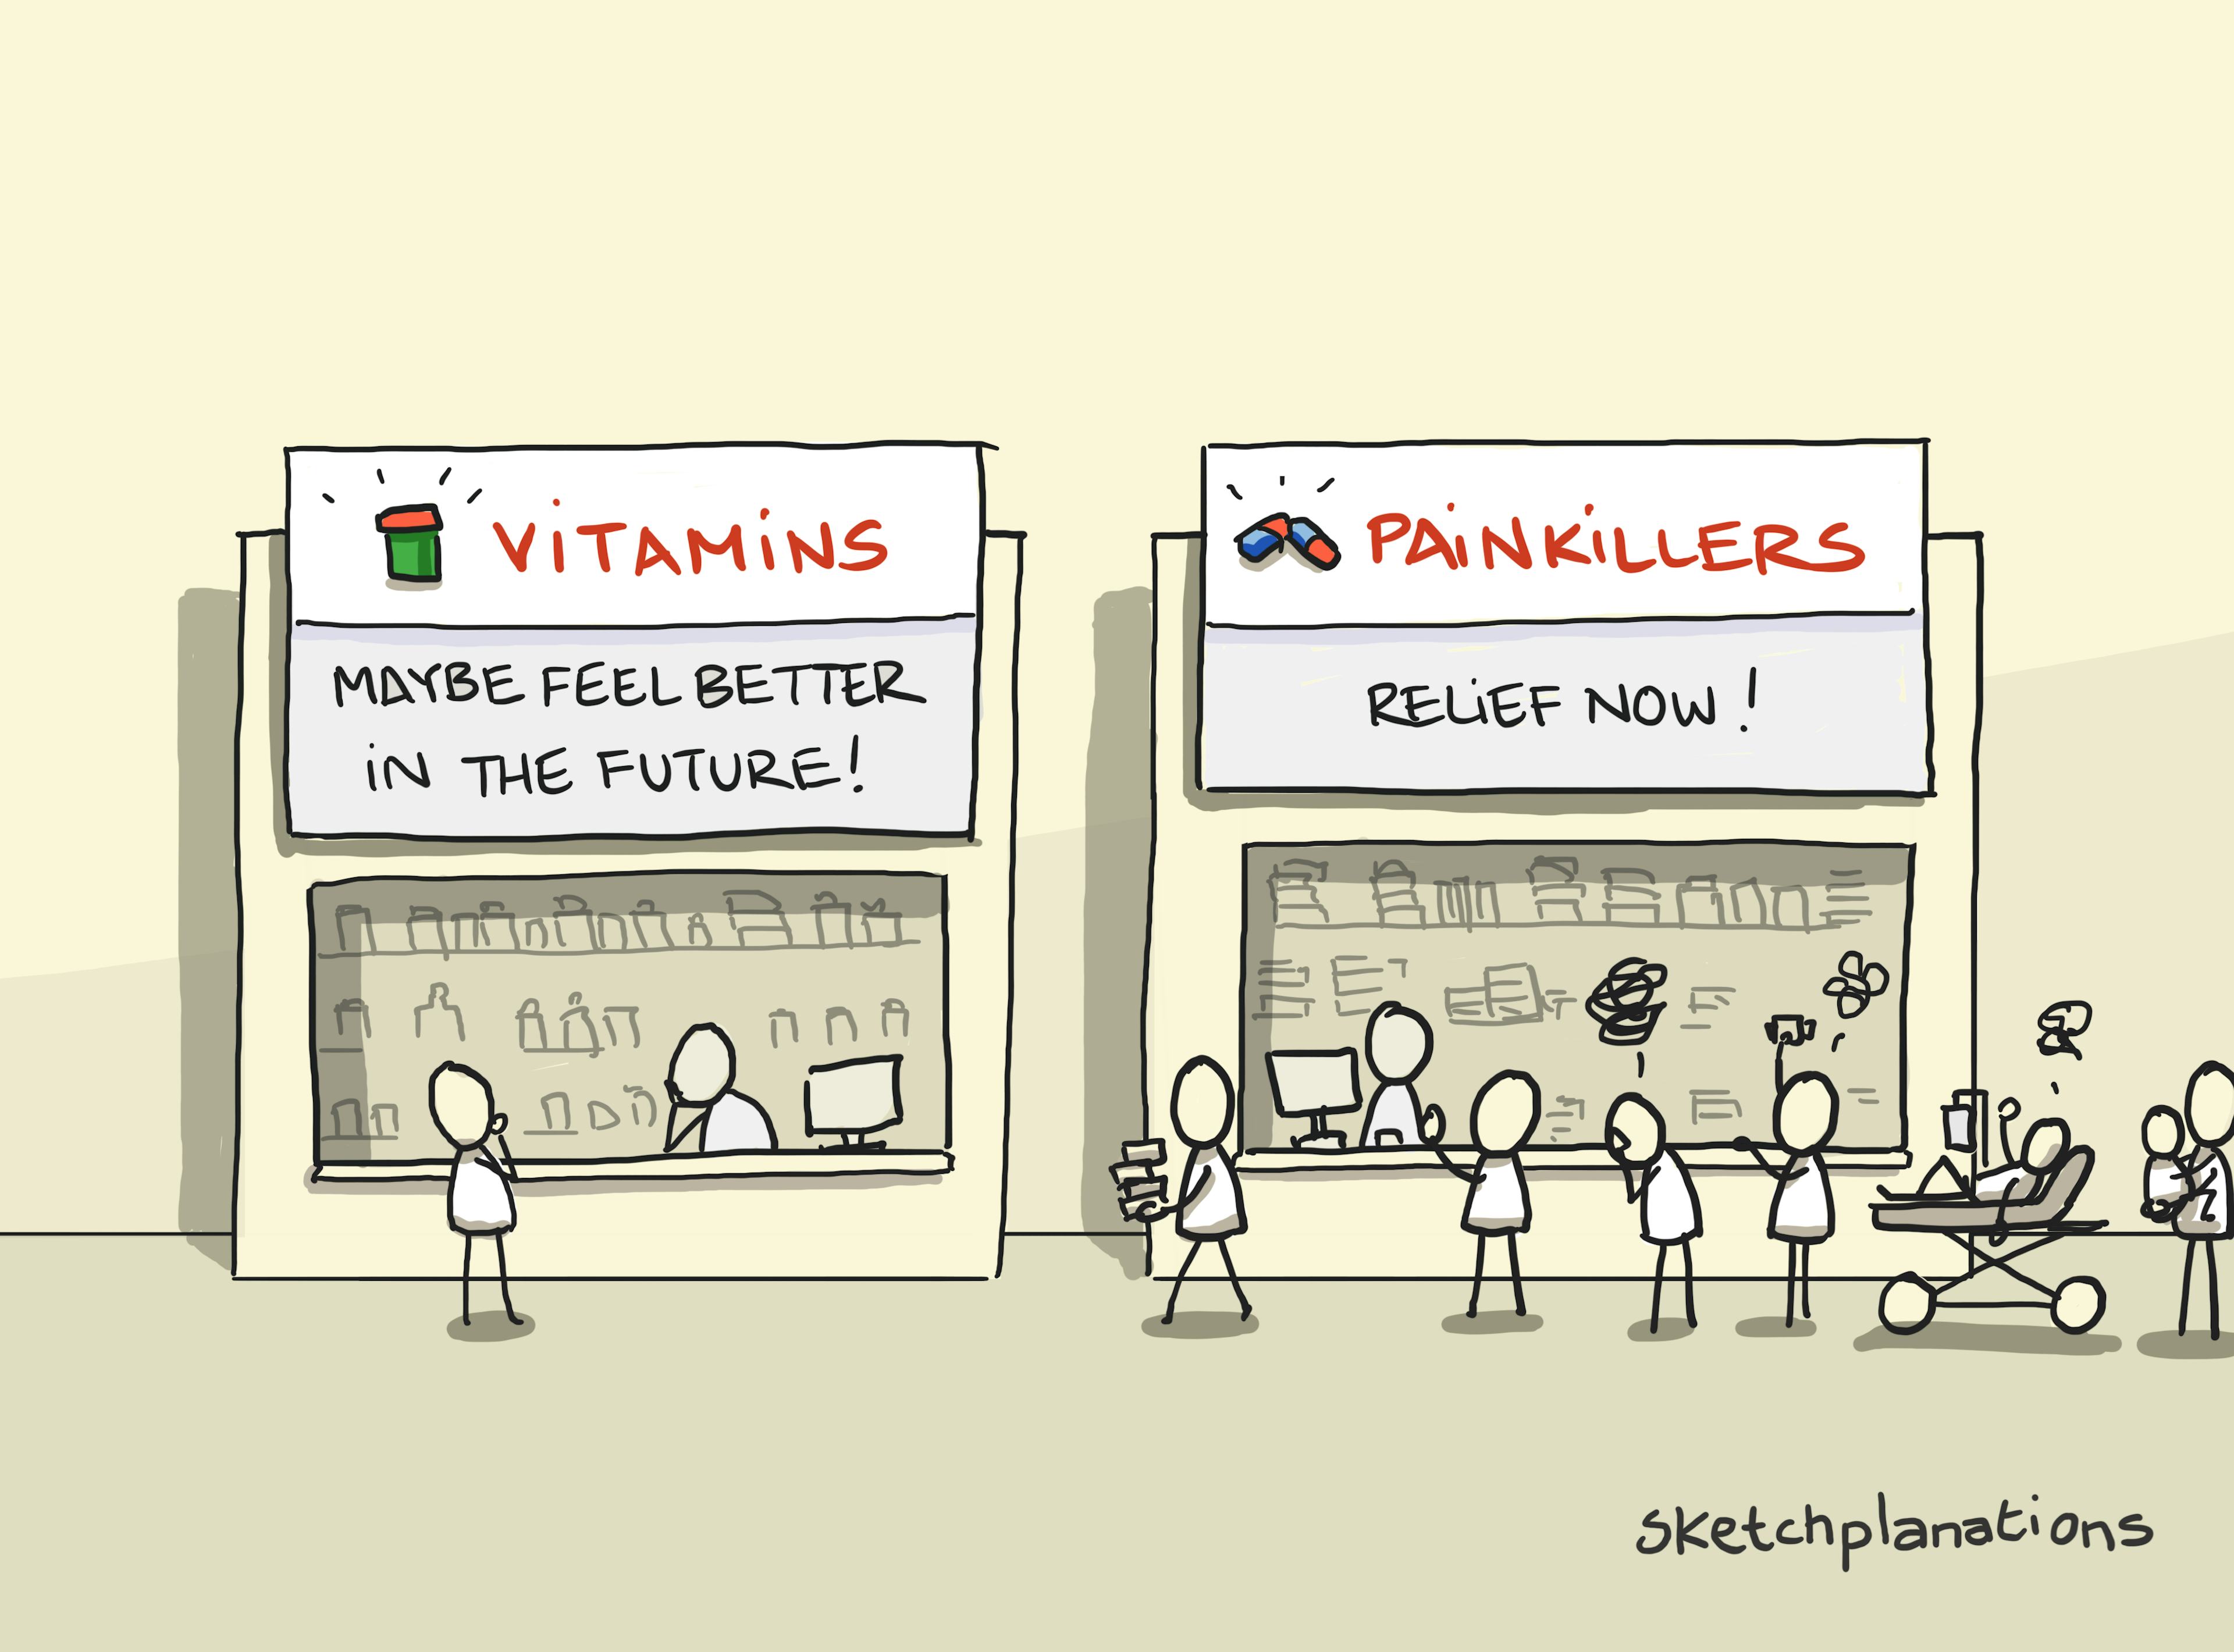 Sell painkillers, not vitamins illustration: showing two stores, one for vitamins with just one customer and vague future benefits, next to a busy store selling painkillers with a queue of people seeking "relief now!"